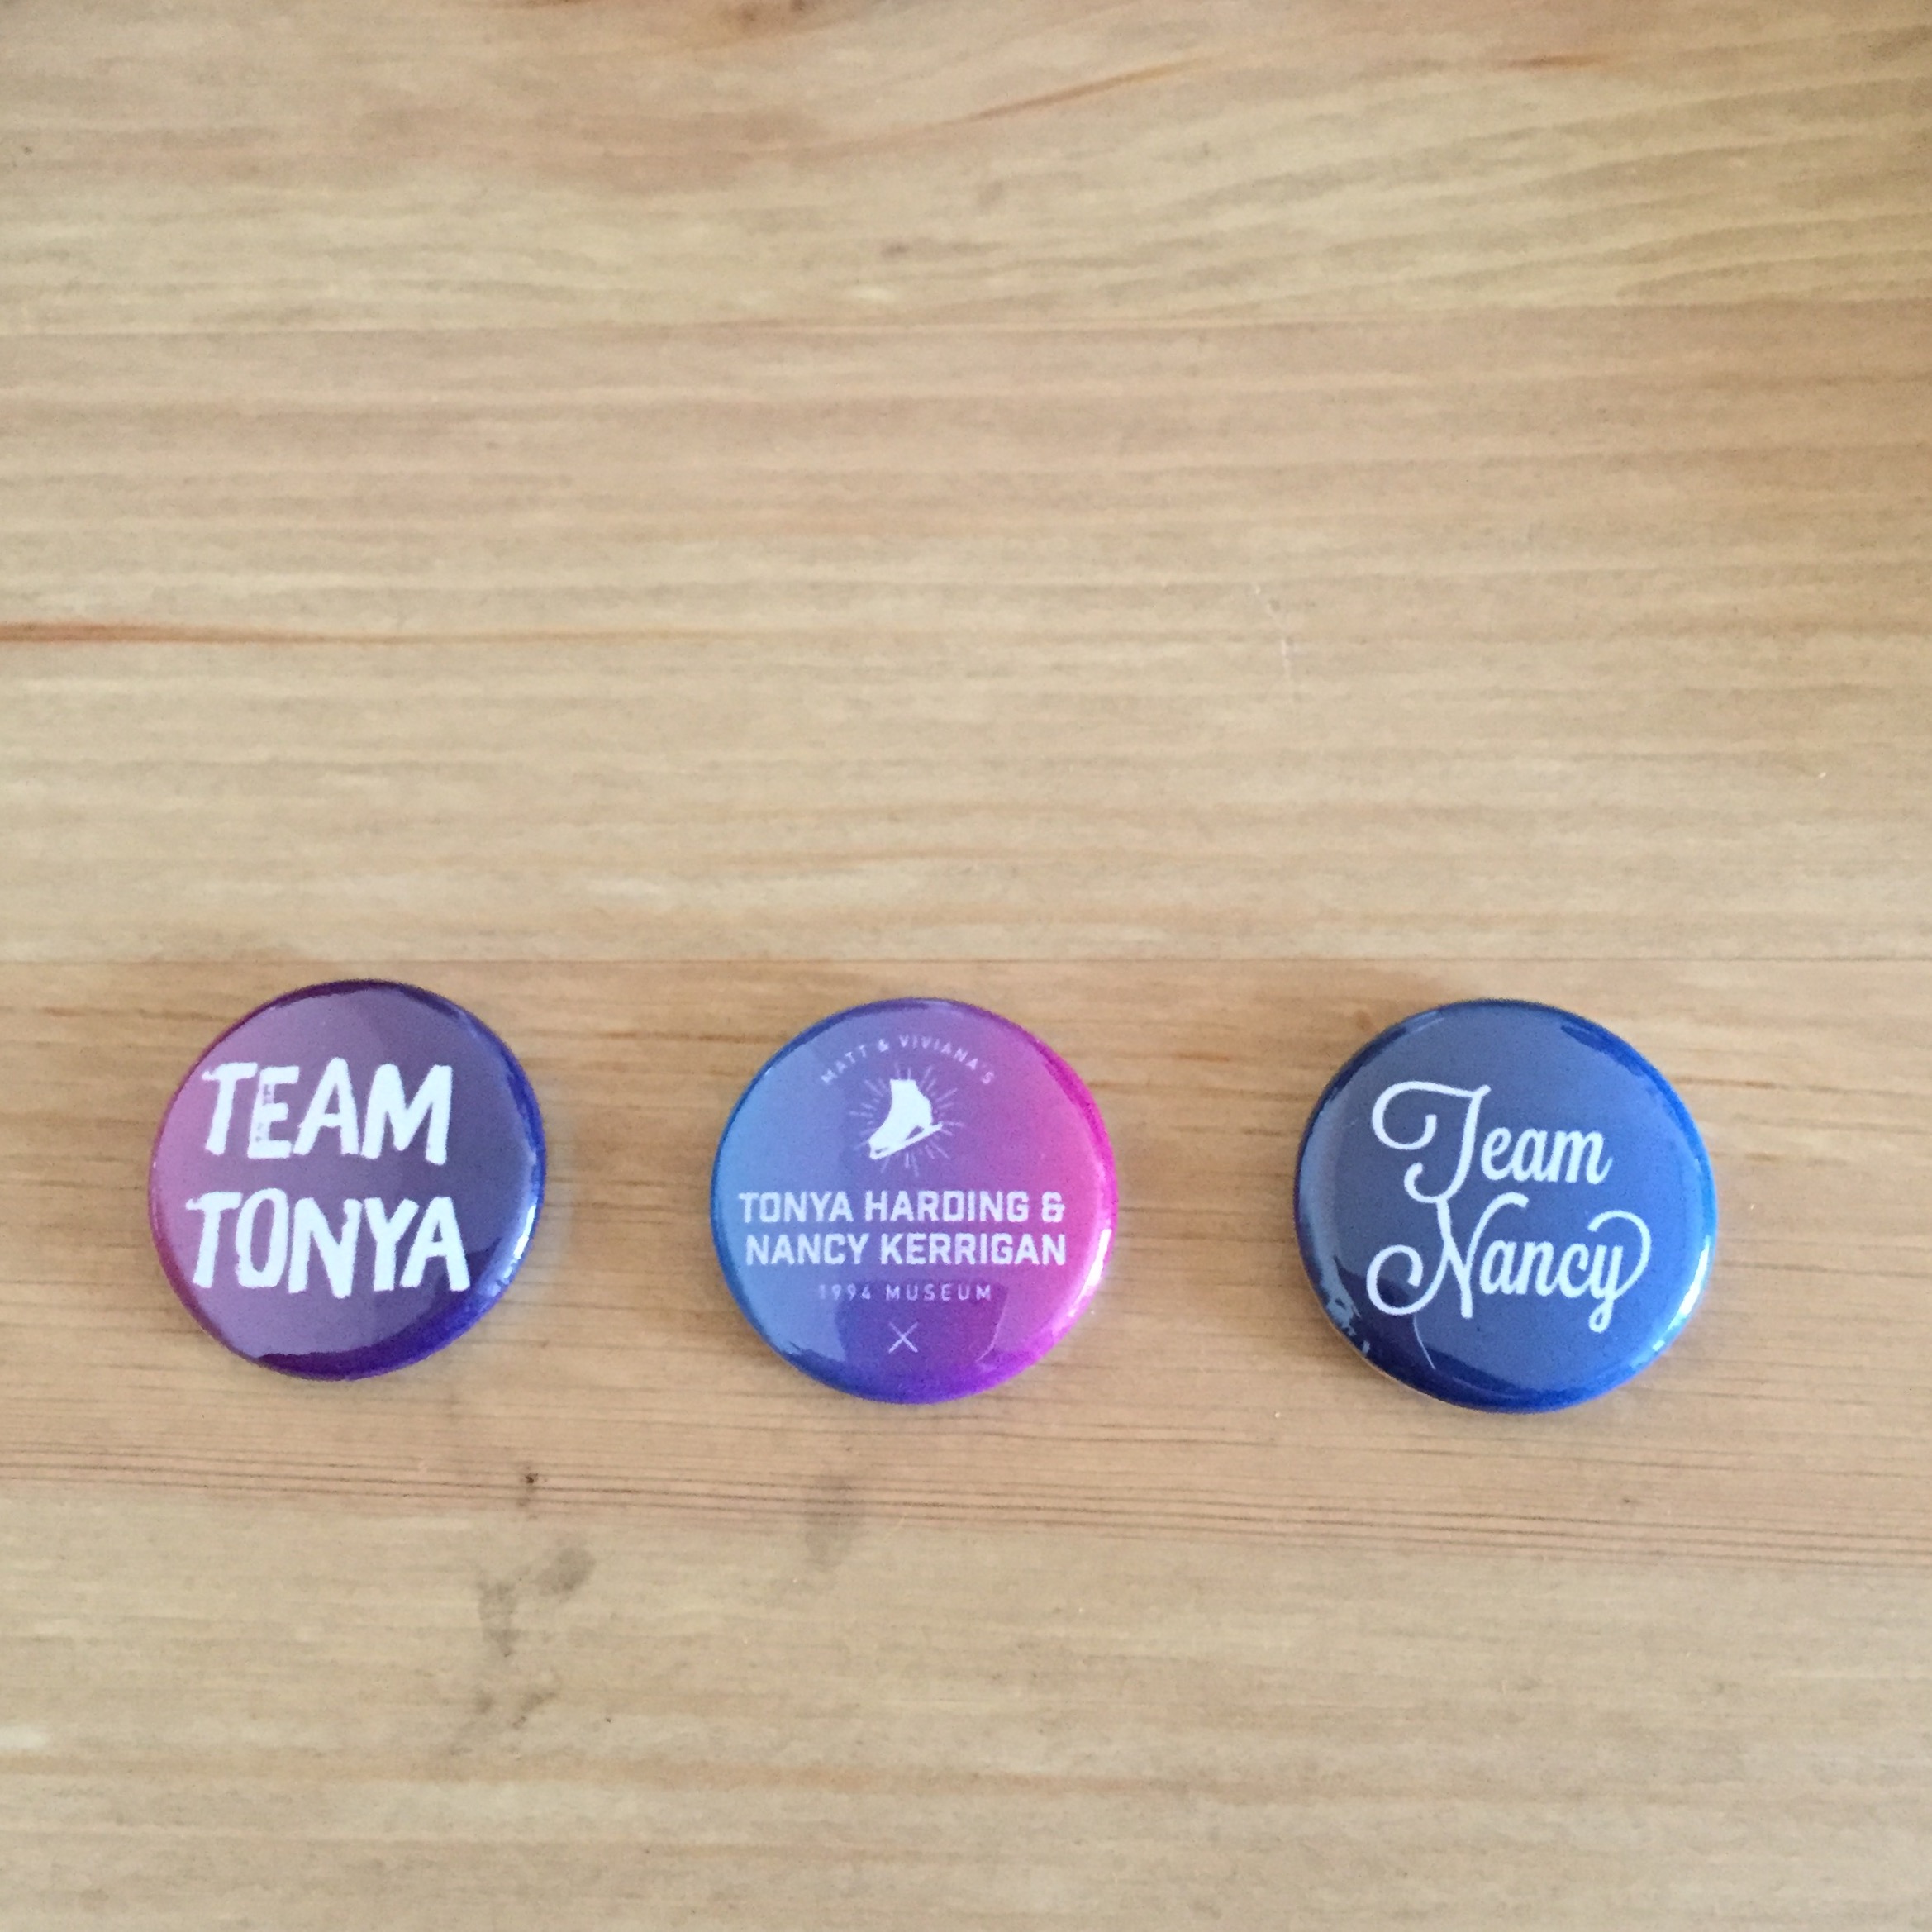 PHOTO: A set of buttons were created to promote the Tonya Harding and Nancy Kerrigan Museum 1994.